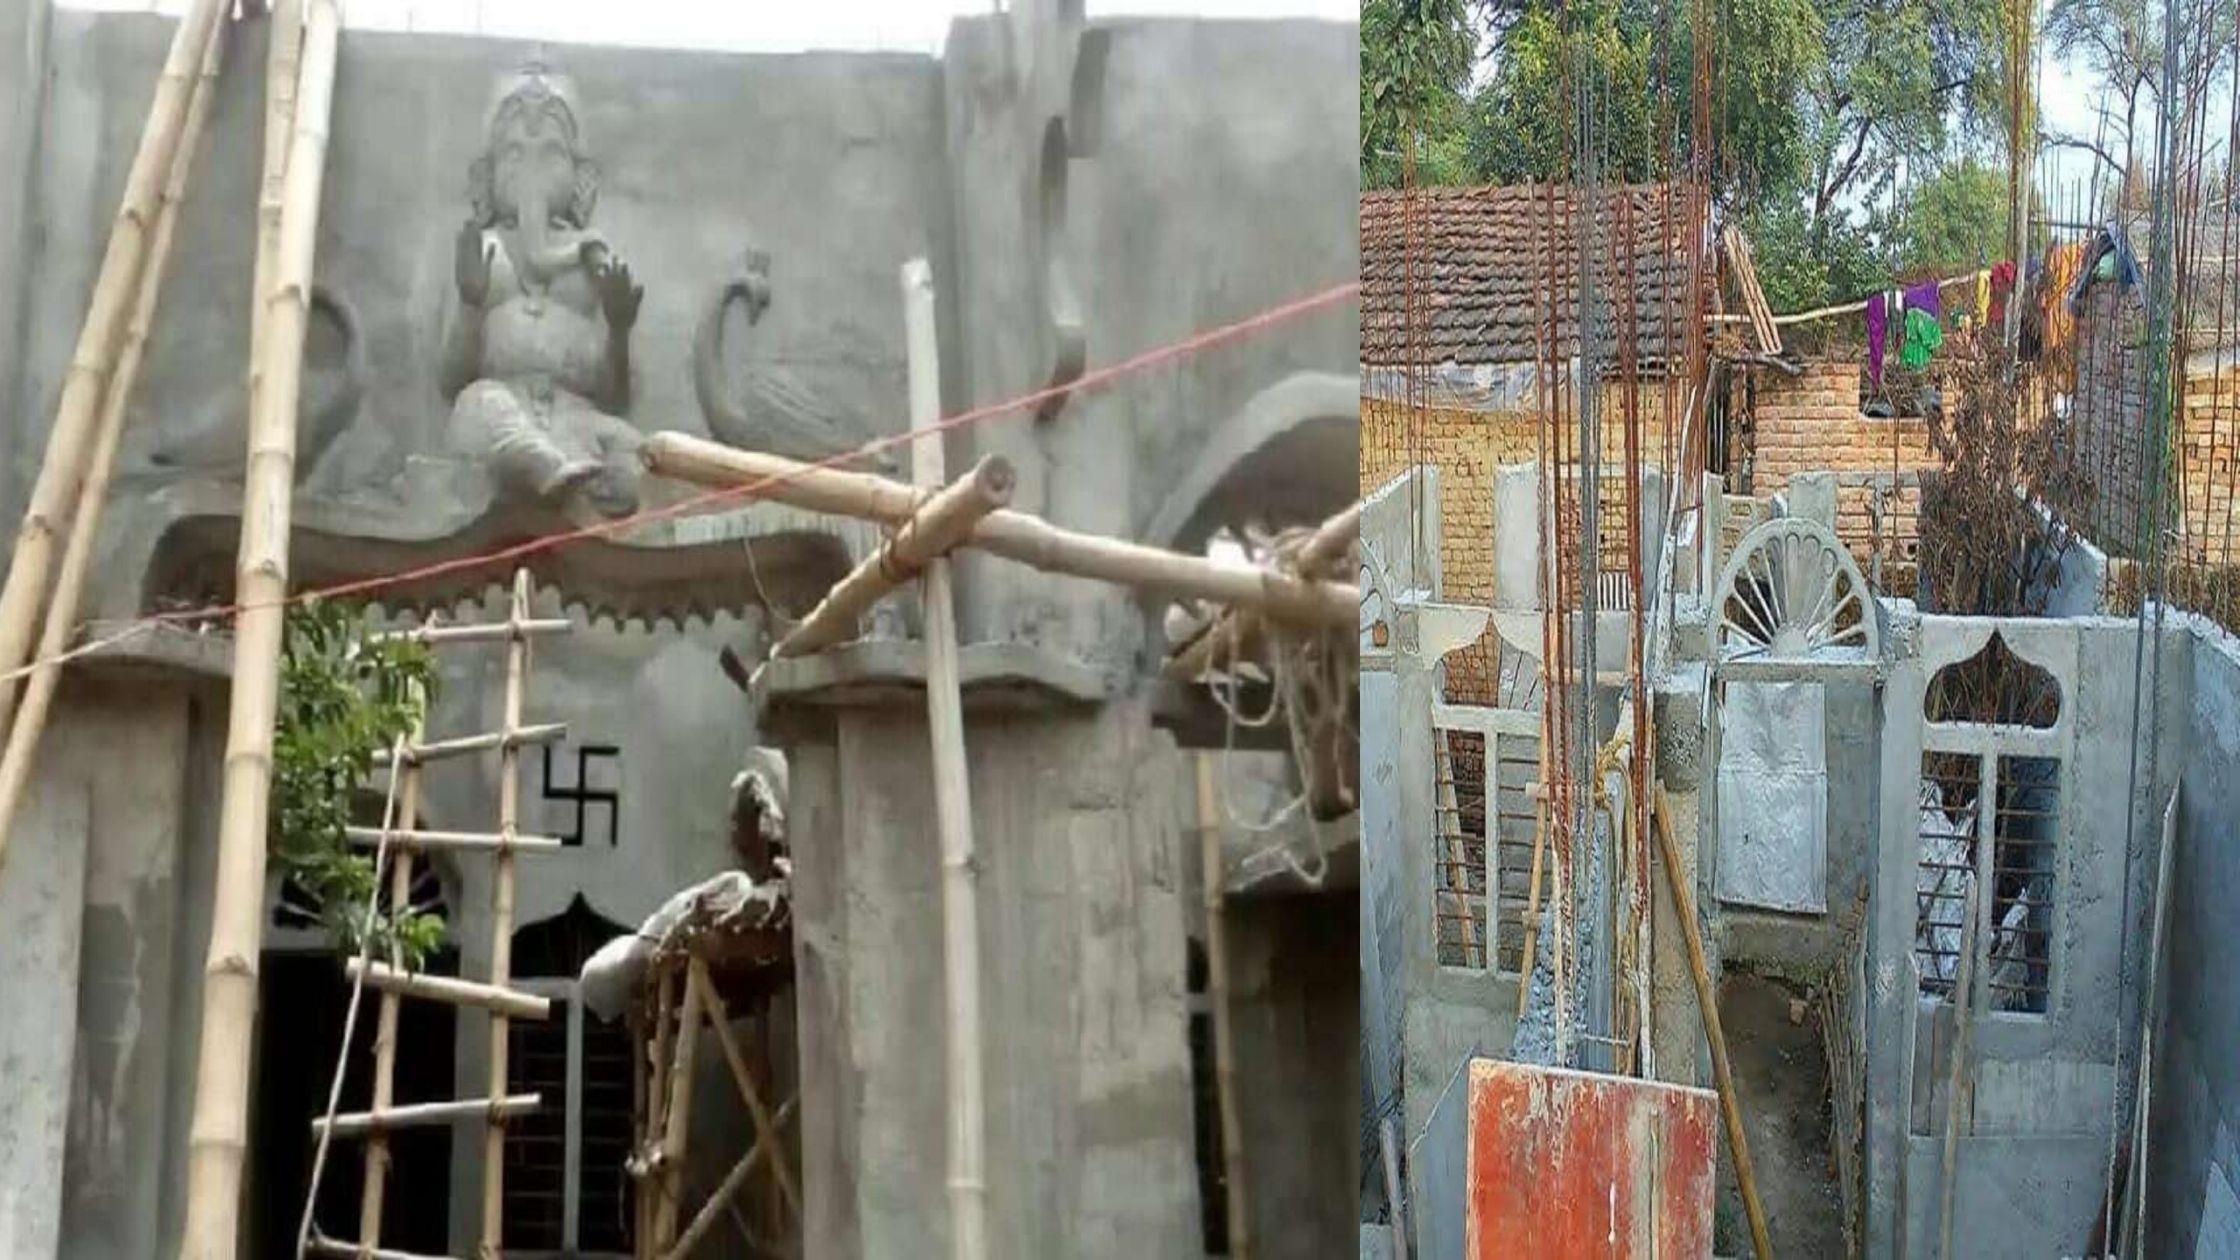 Bihar carpenter built a house with cement and sand